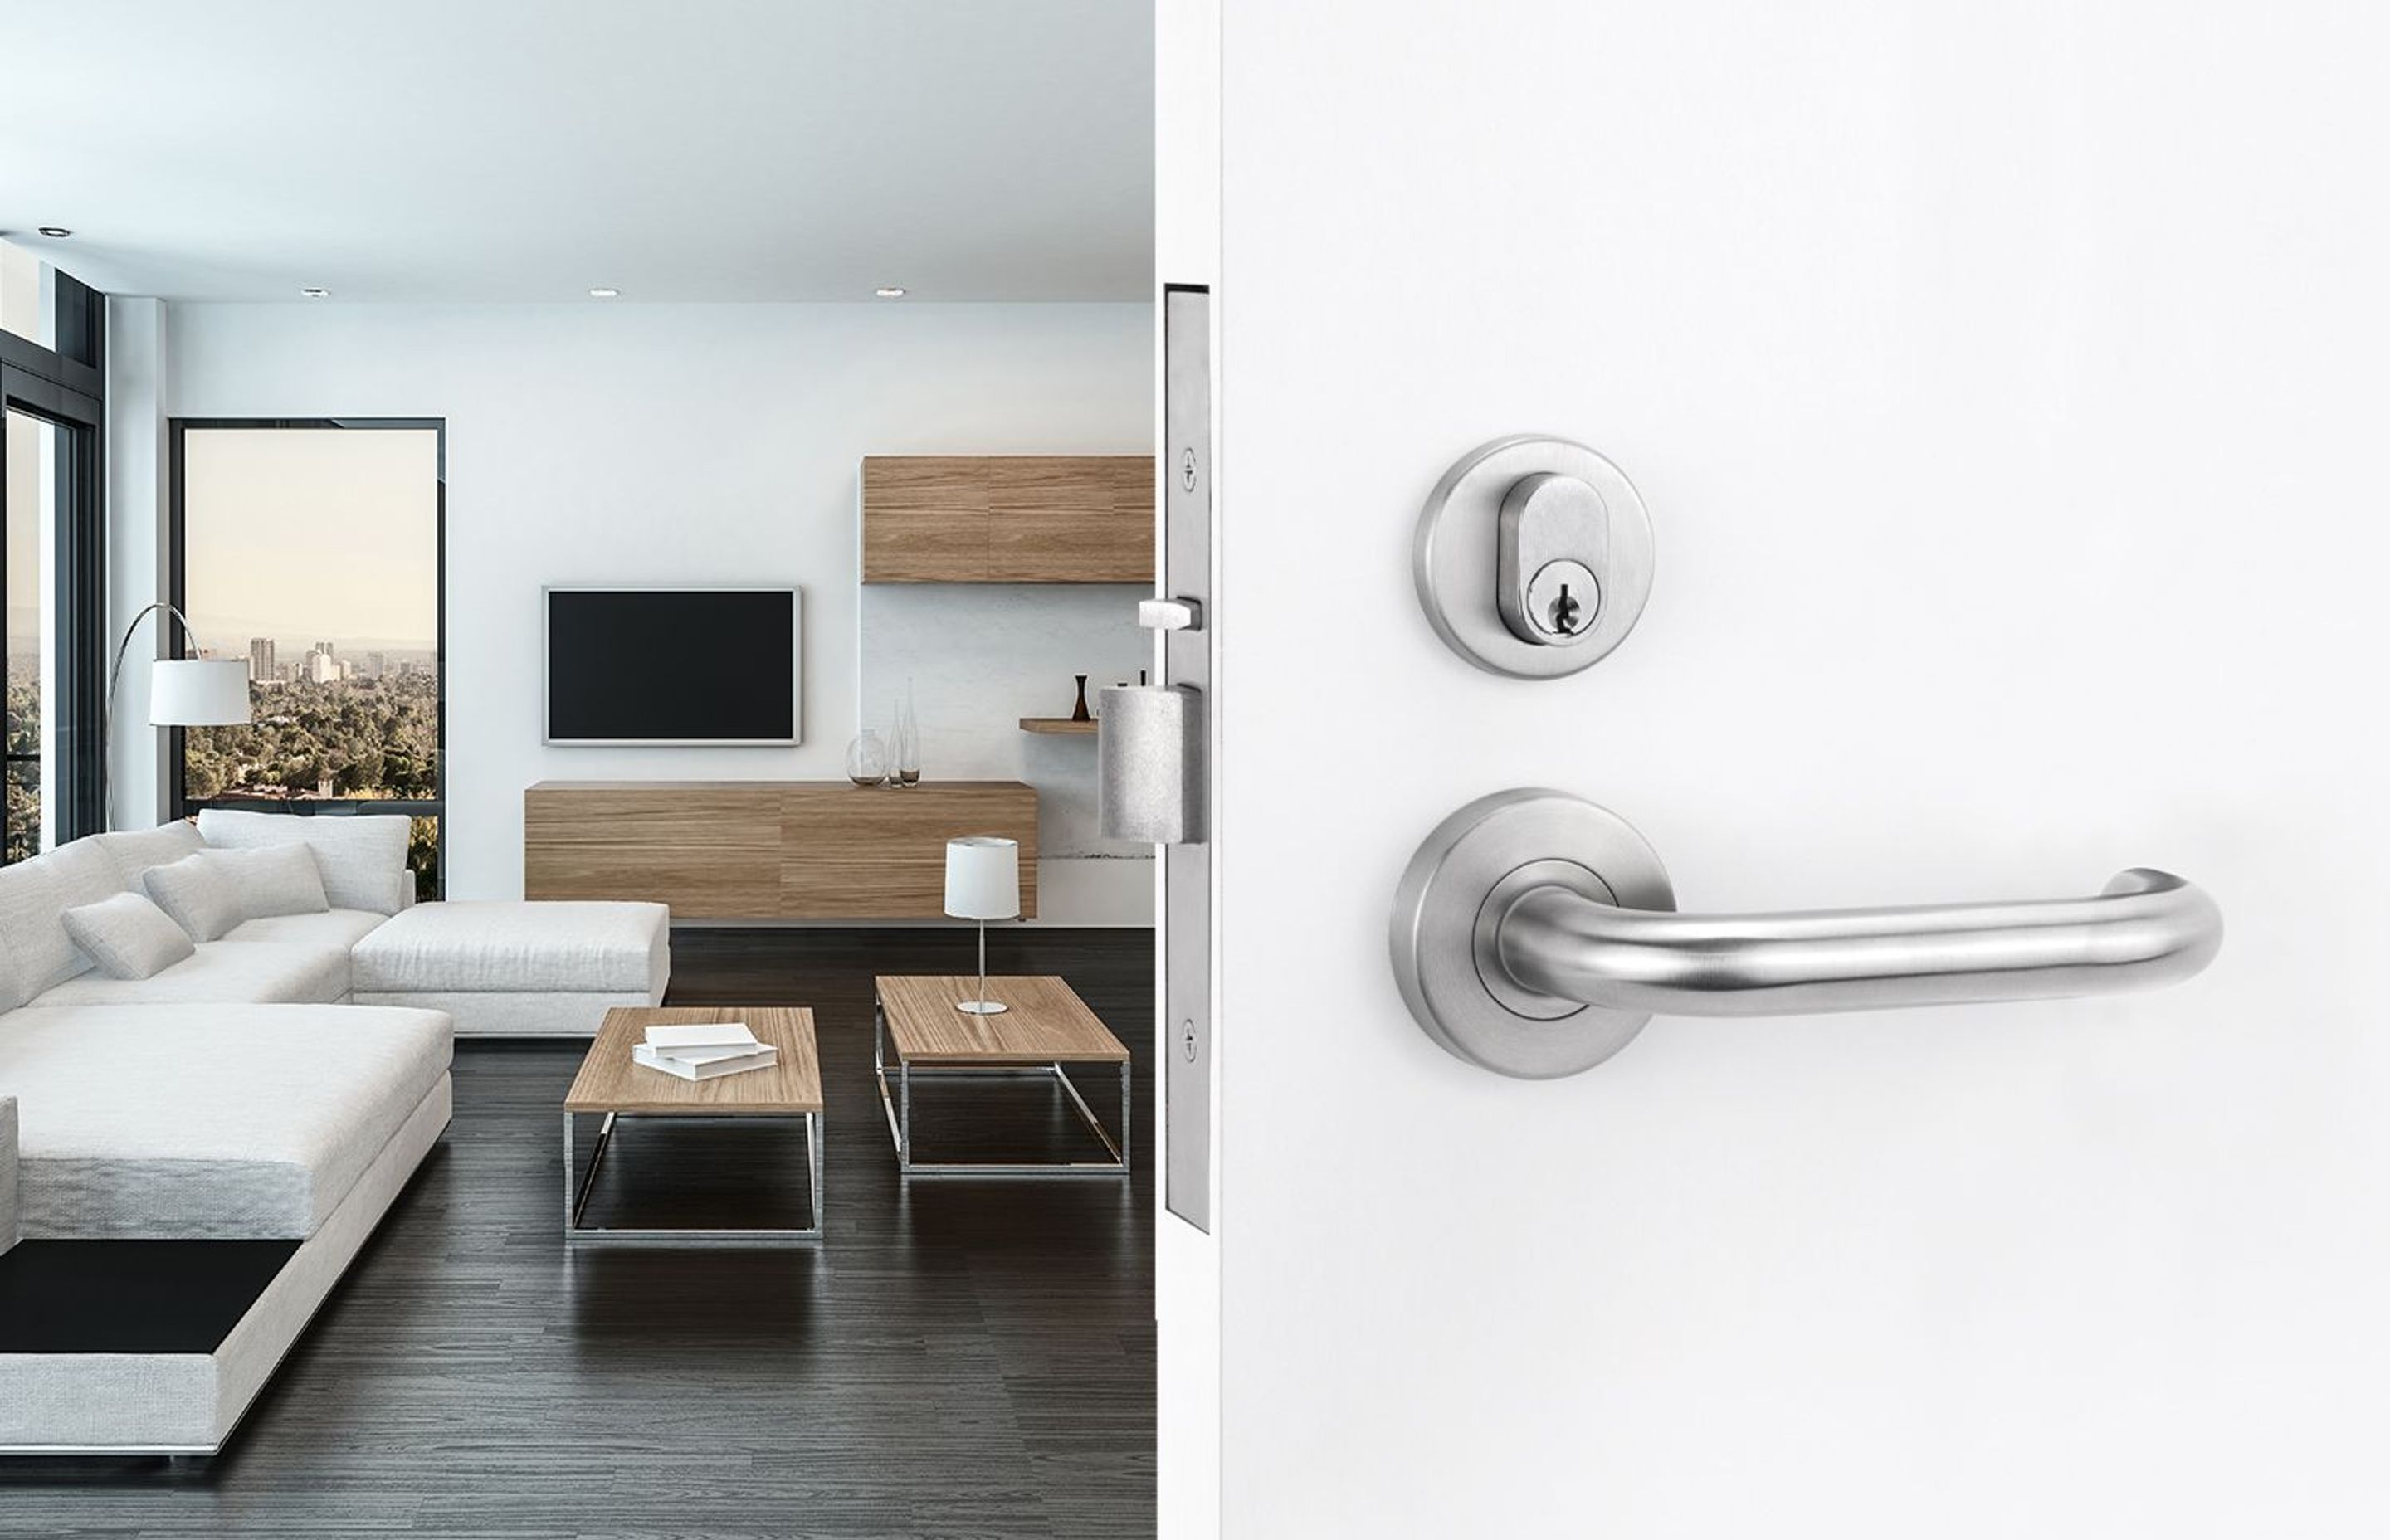 The Yale Simplicity Series includes both the door furniture closer and lock all in one, making it ideal for use in multiunit residential developments.